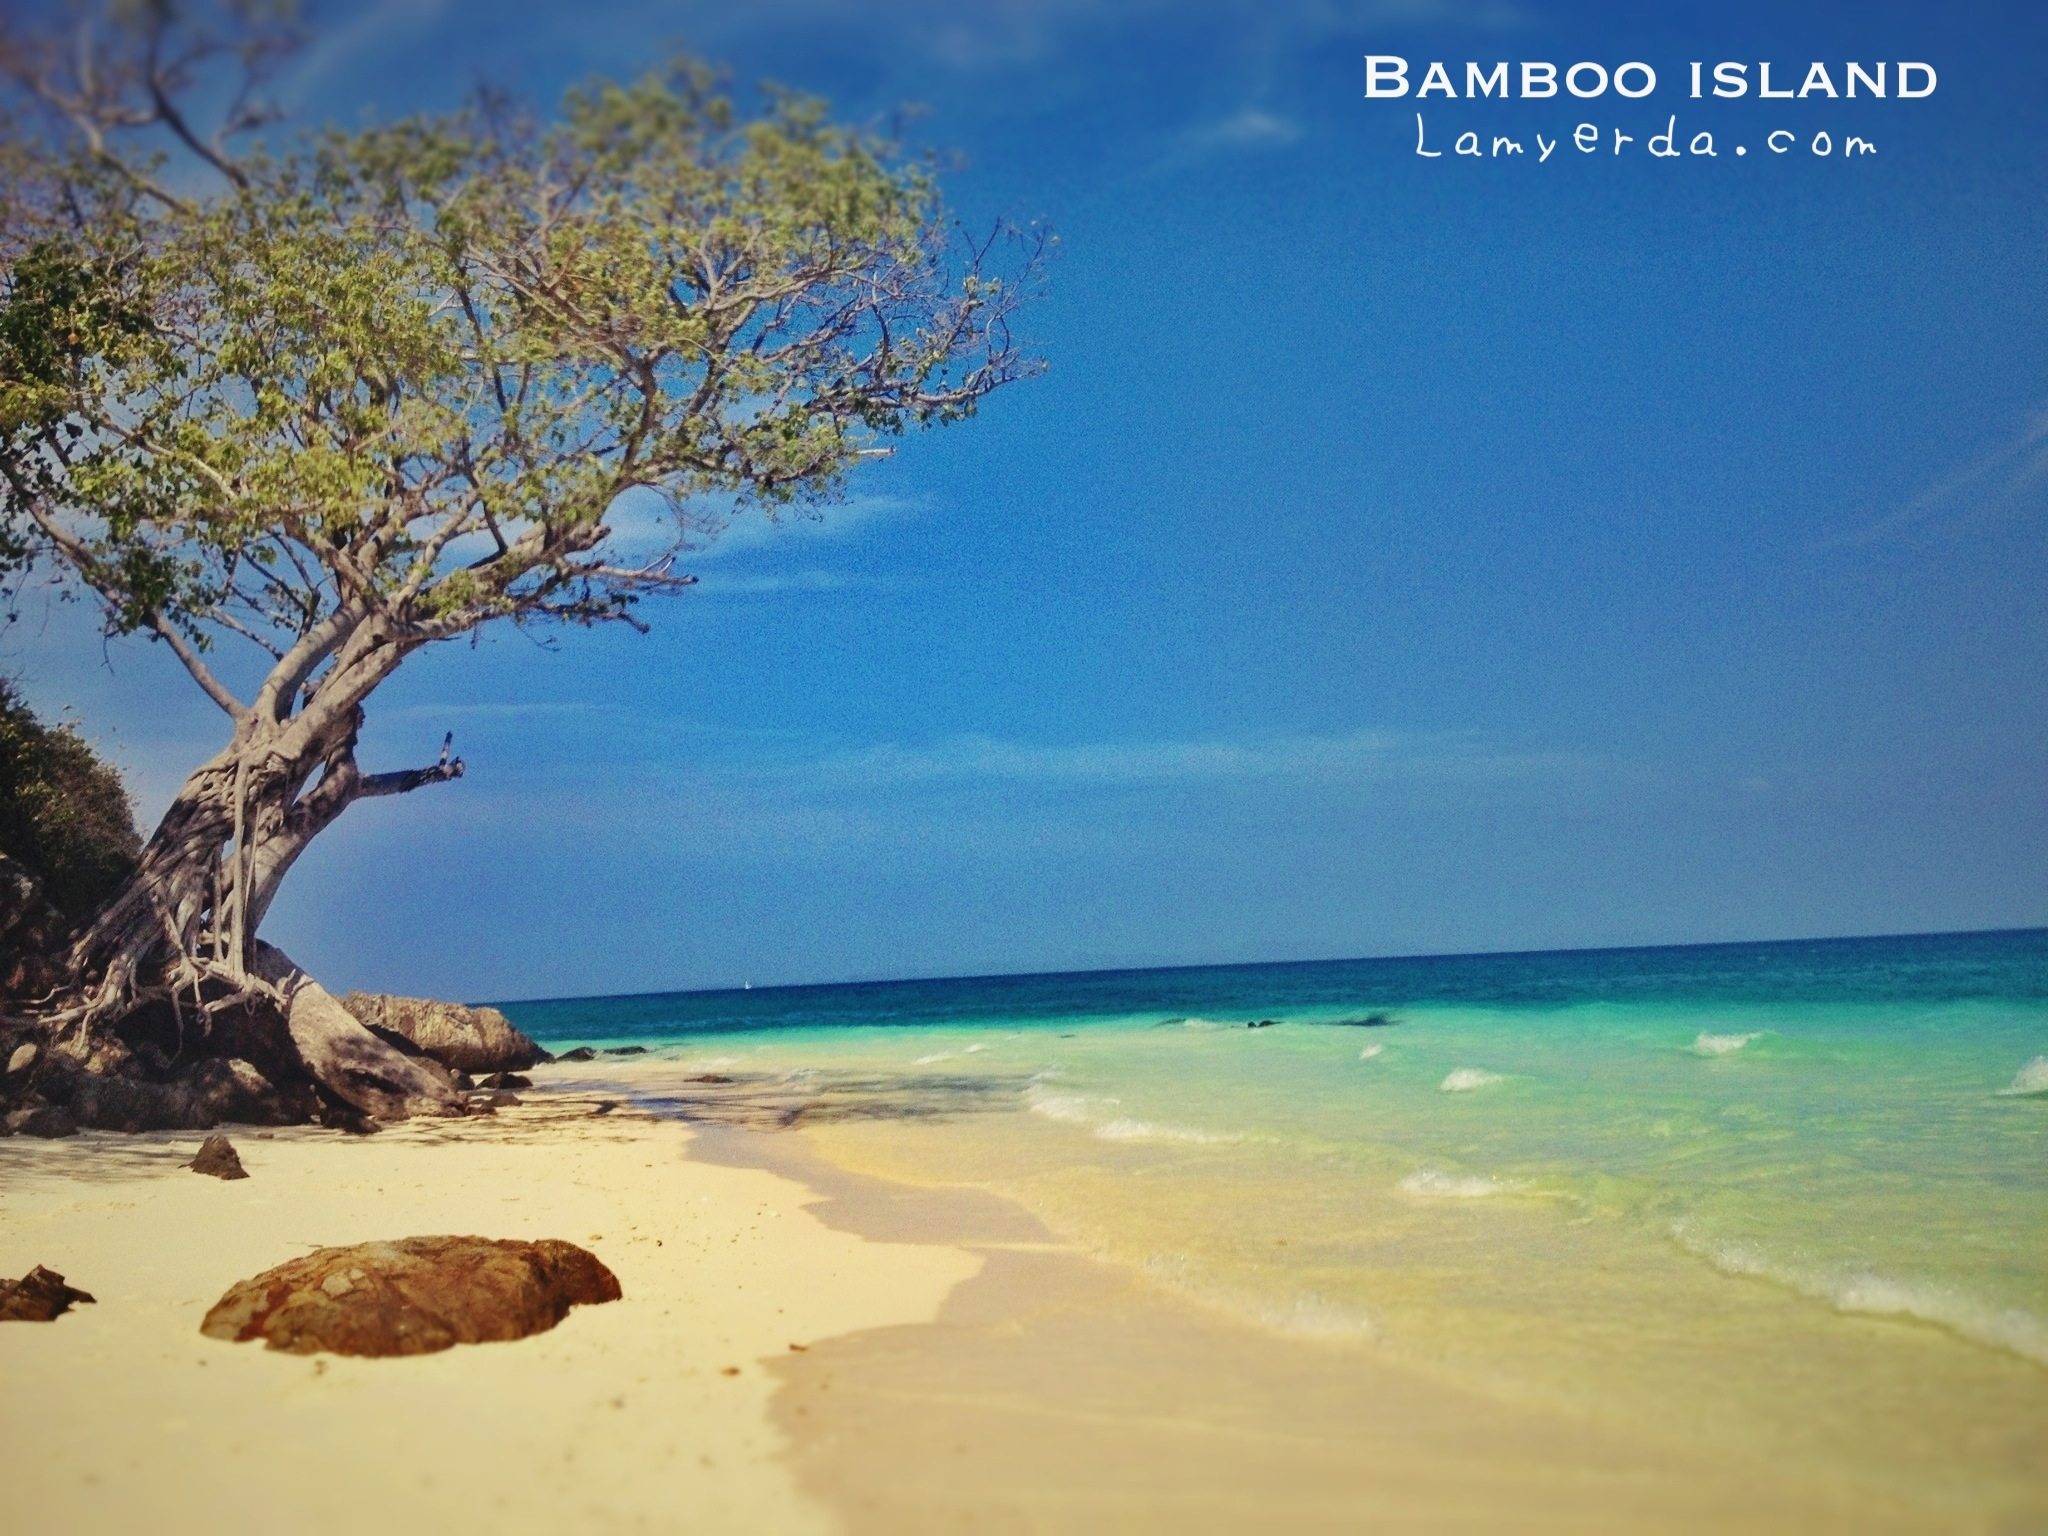 Swimming in the blue waters of Bamboo Island